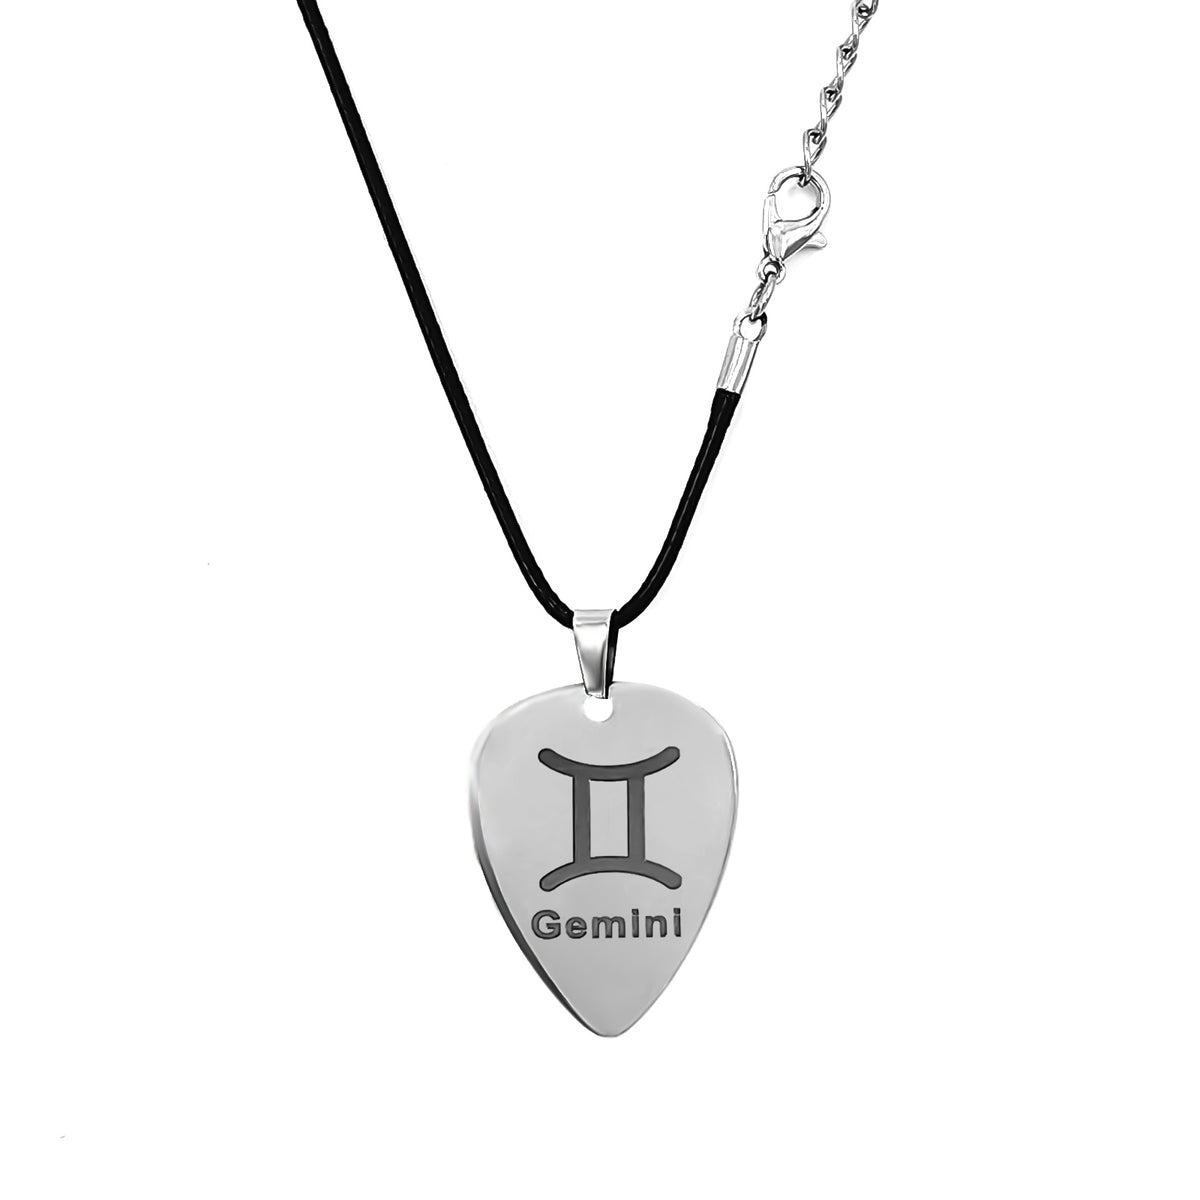 Musiin Guitar Pick Necklace Stainless Steel 12 Constellation Picks Pendant Necklace Music Jewelry for Men Women Gift (Gemini)